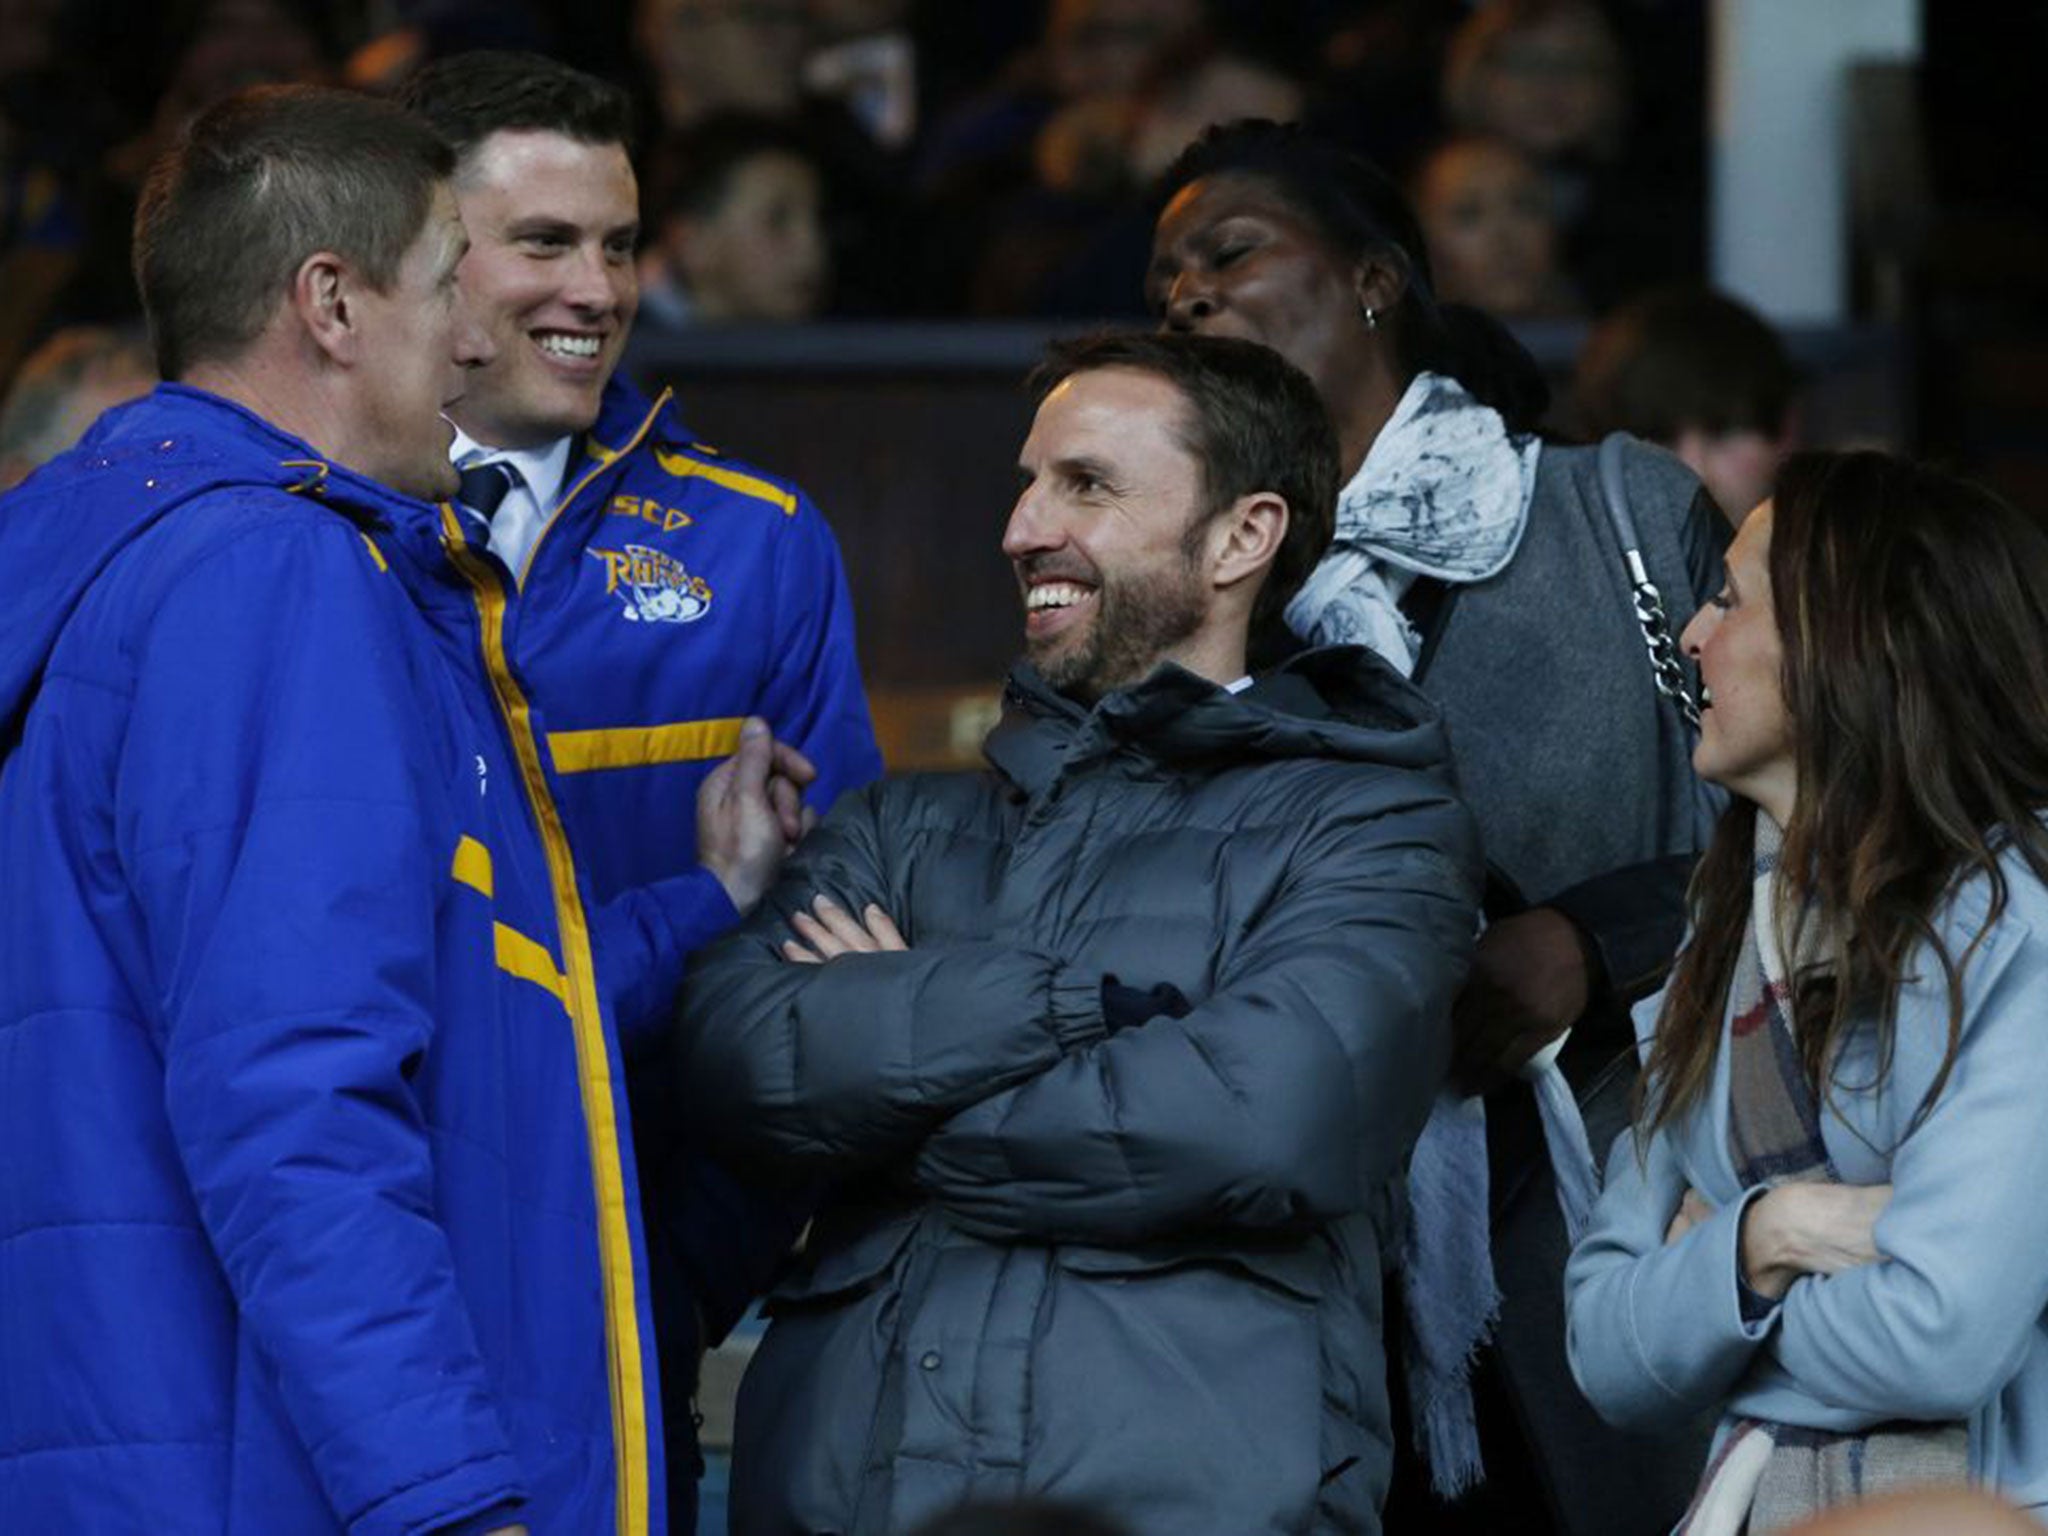 Southgate was invited to the Super League match by the Rhinos Foundation